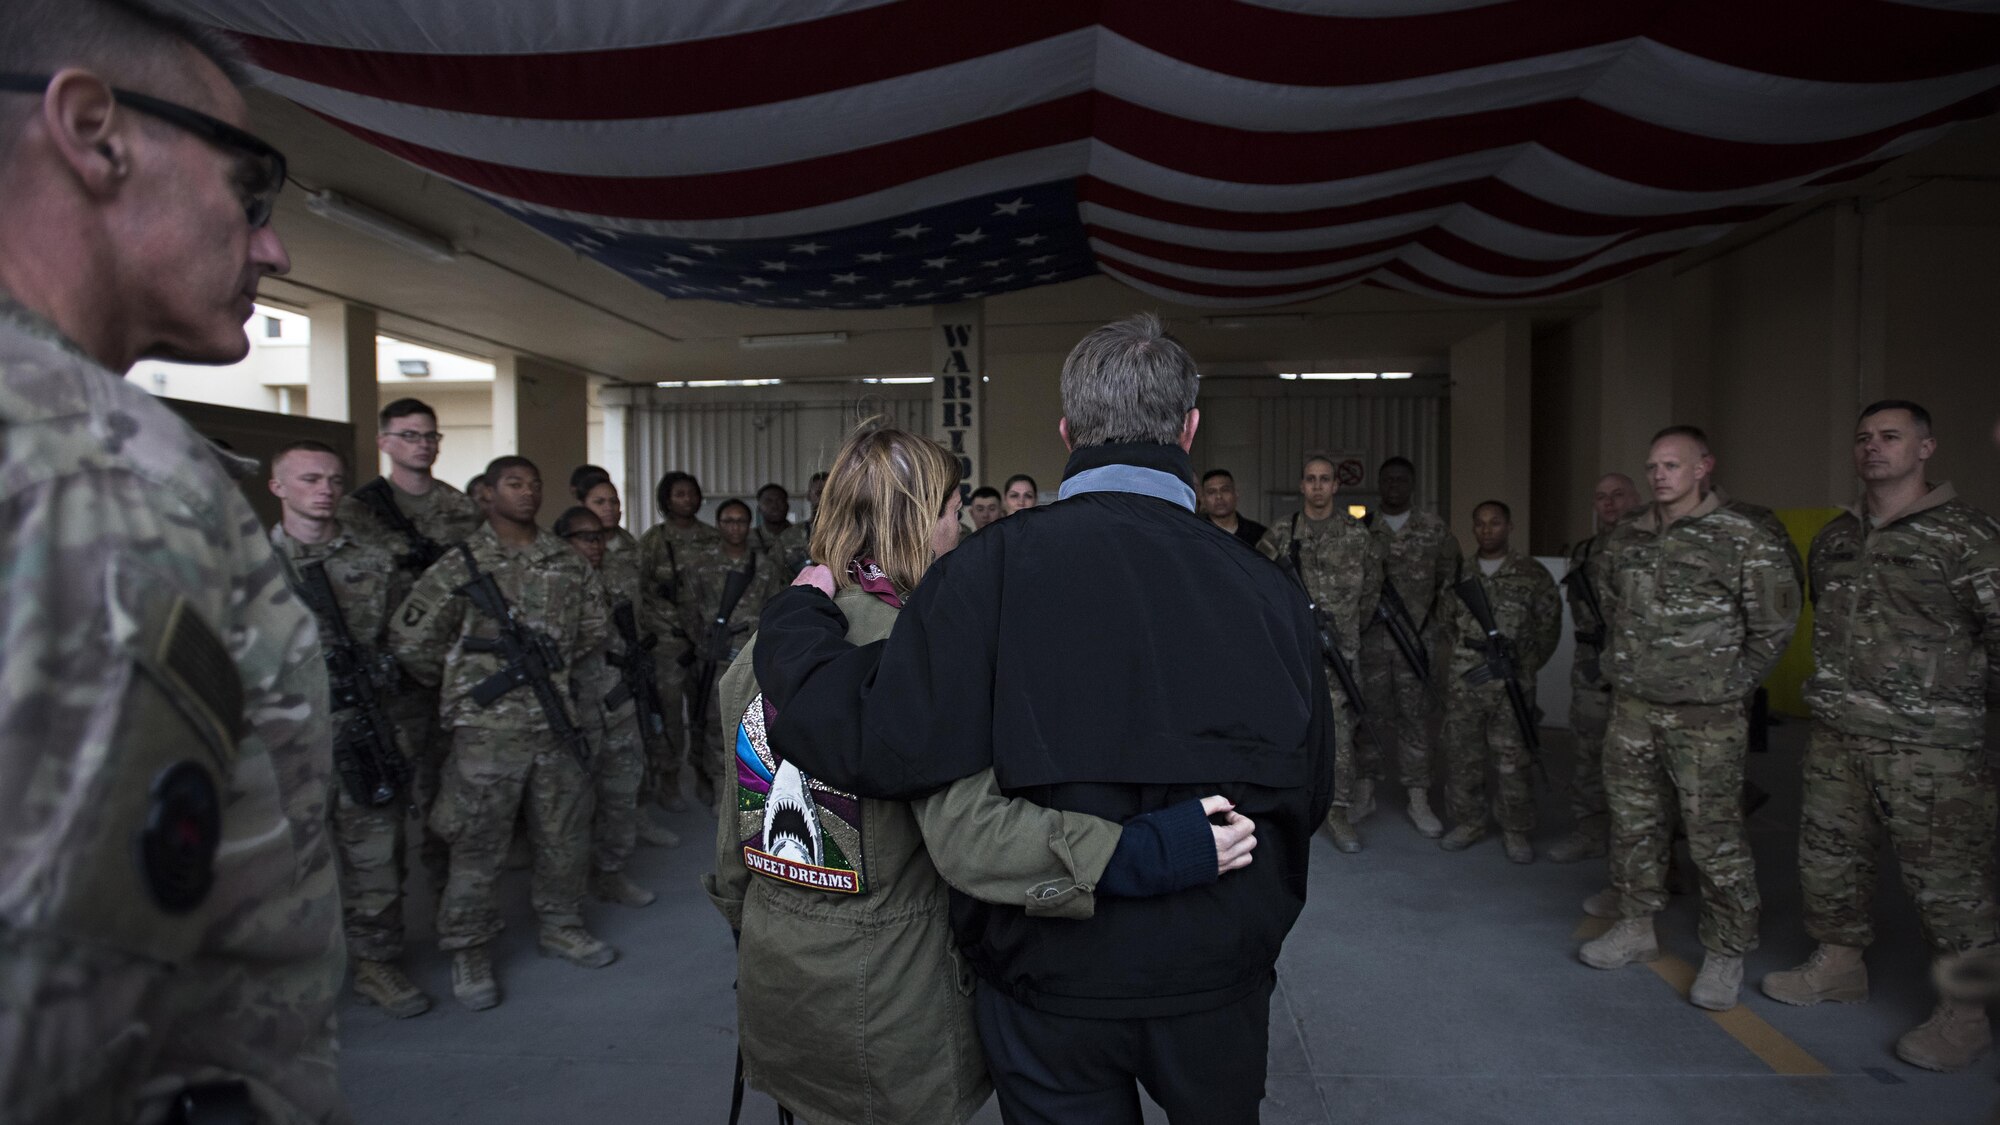 Defense Secretary Ash Carter and his wife, Stephanie, address service members at the Craig Joint Theater Hospital Dec. 9, 2016 at Bagram Airfield, Afghanistan. Carter thanked members of Task Force – Medical for their casualty response efforts after a recent suicide bombing here. (U.S. Air Force photo by Staff Sgt. Katherine Spessa)